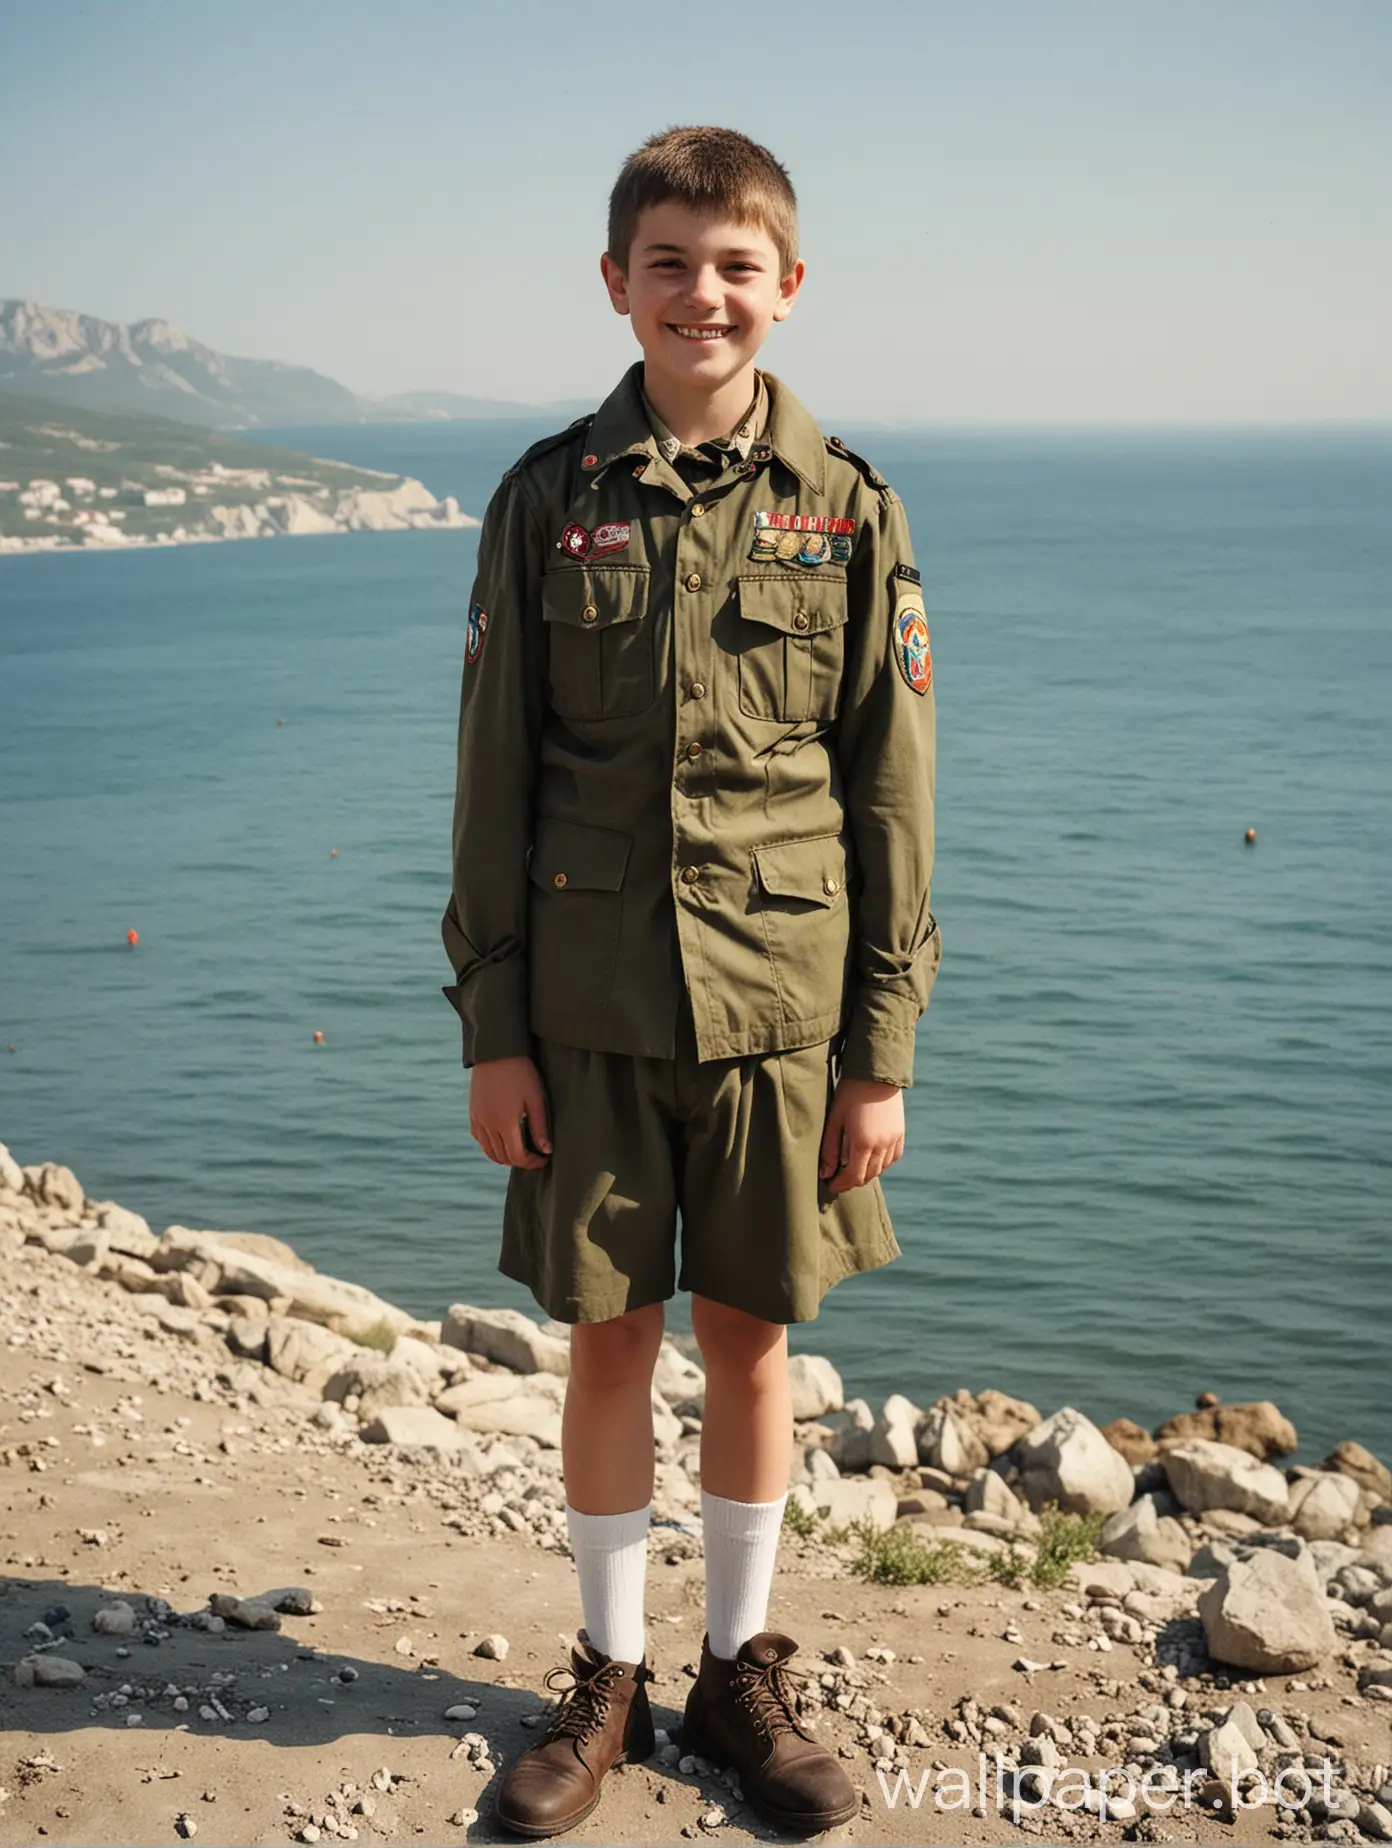 Crimea, view of the sea, boy scout 13 years old, full height, smile